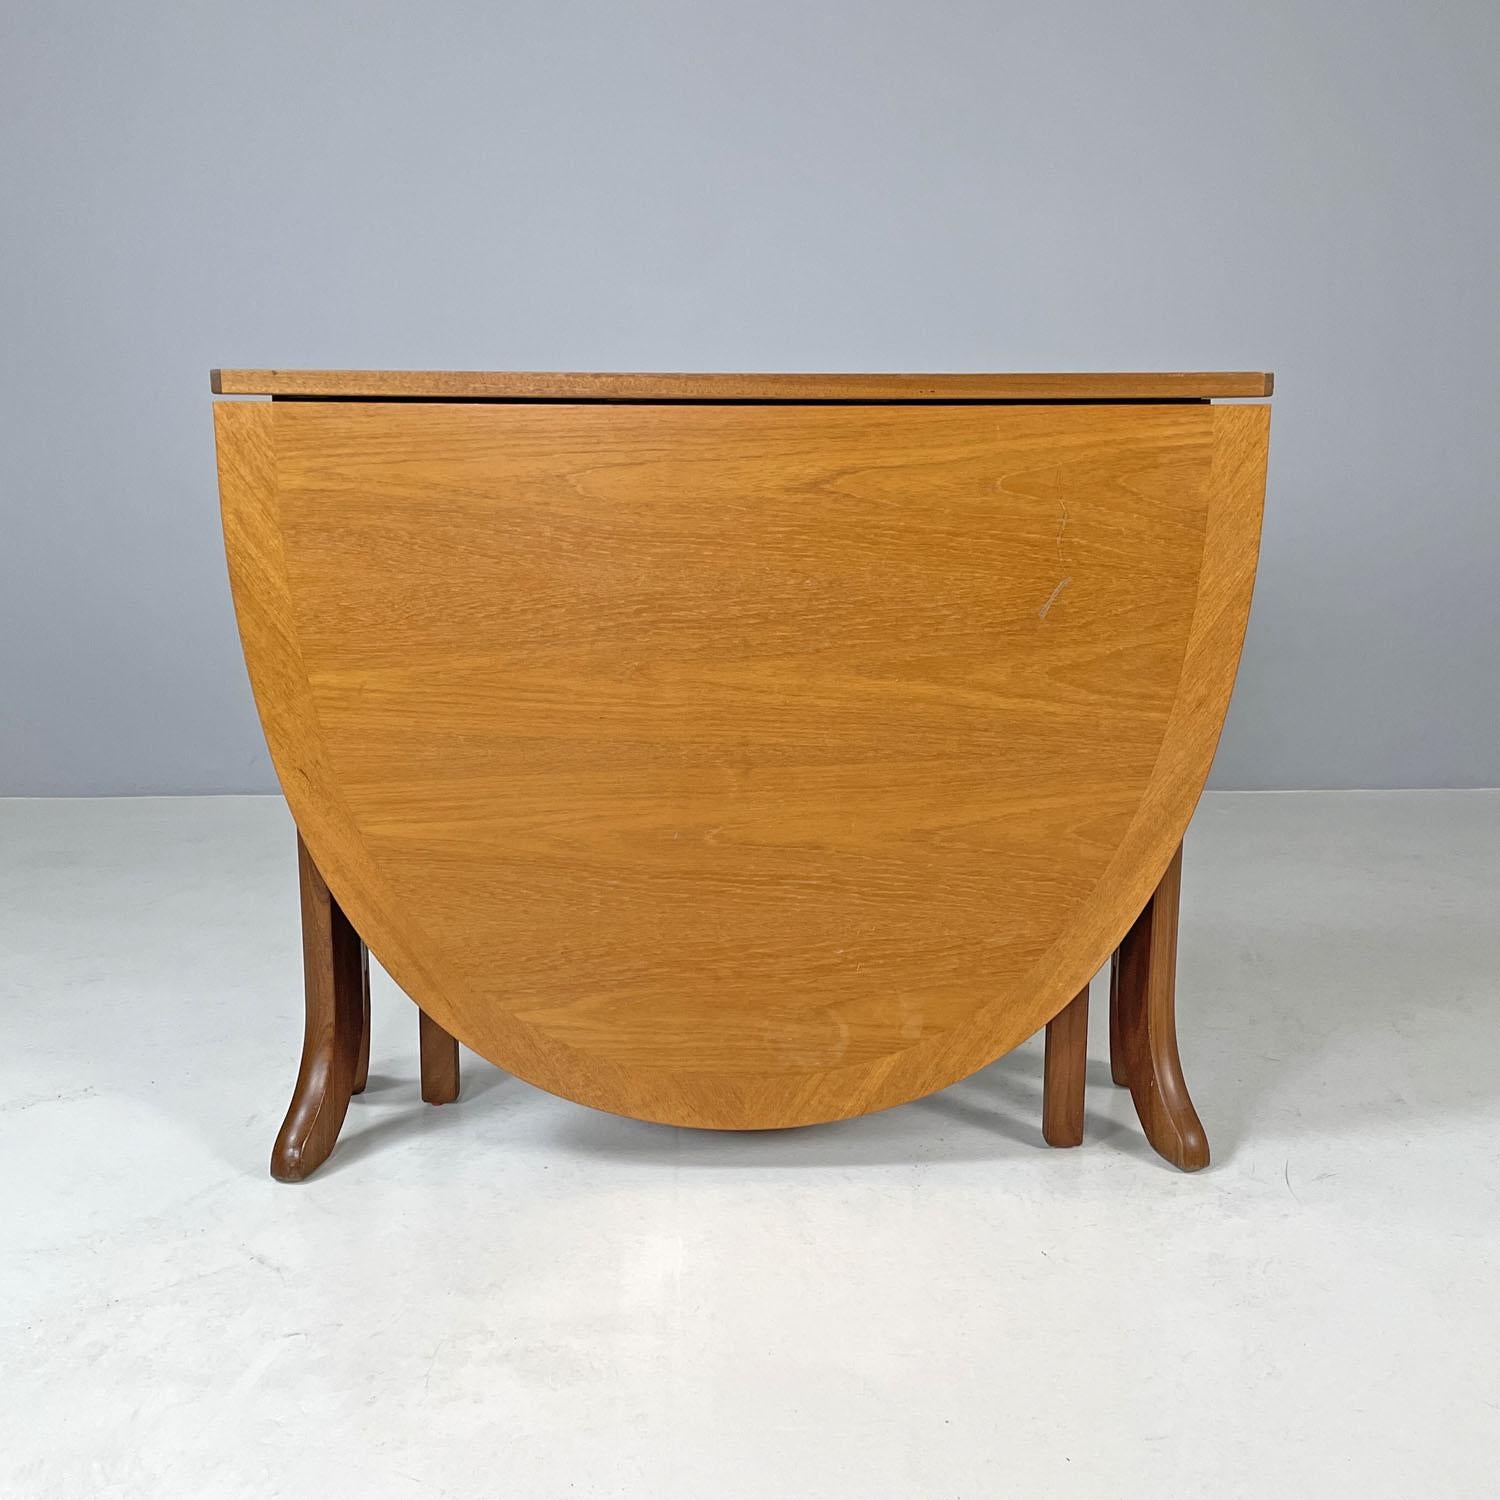 English mid-century modern wooden dining table with flap doors, 1960s For Sale 2